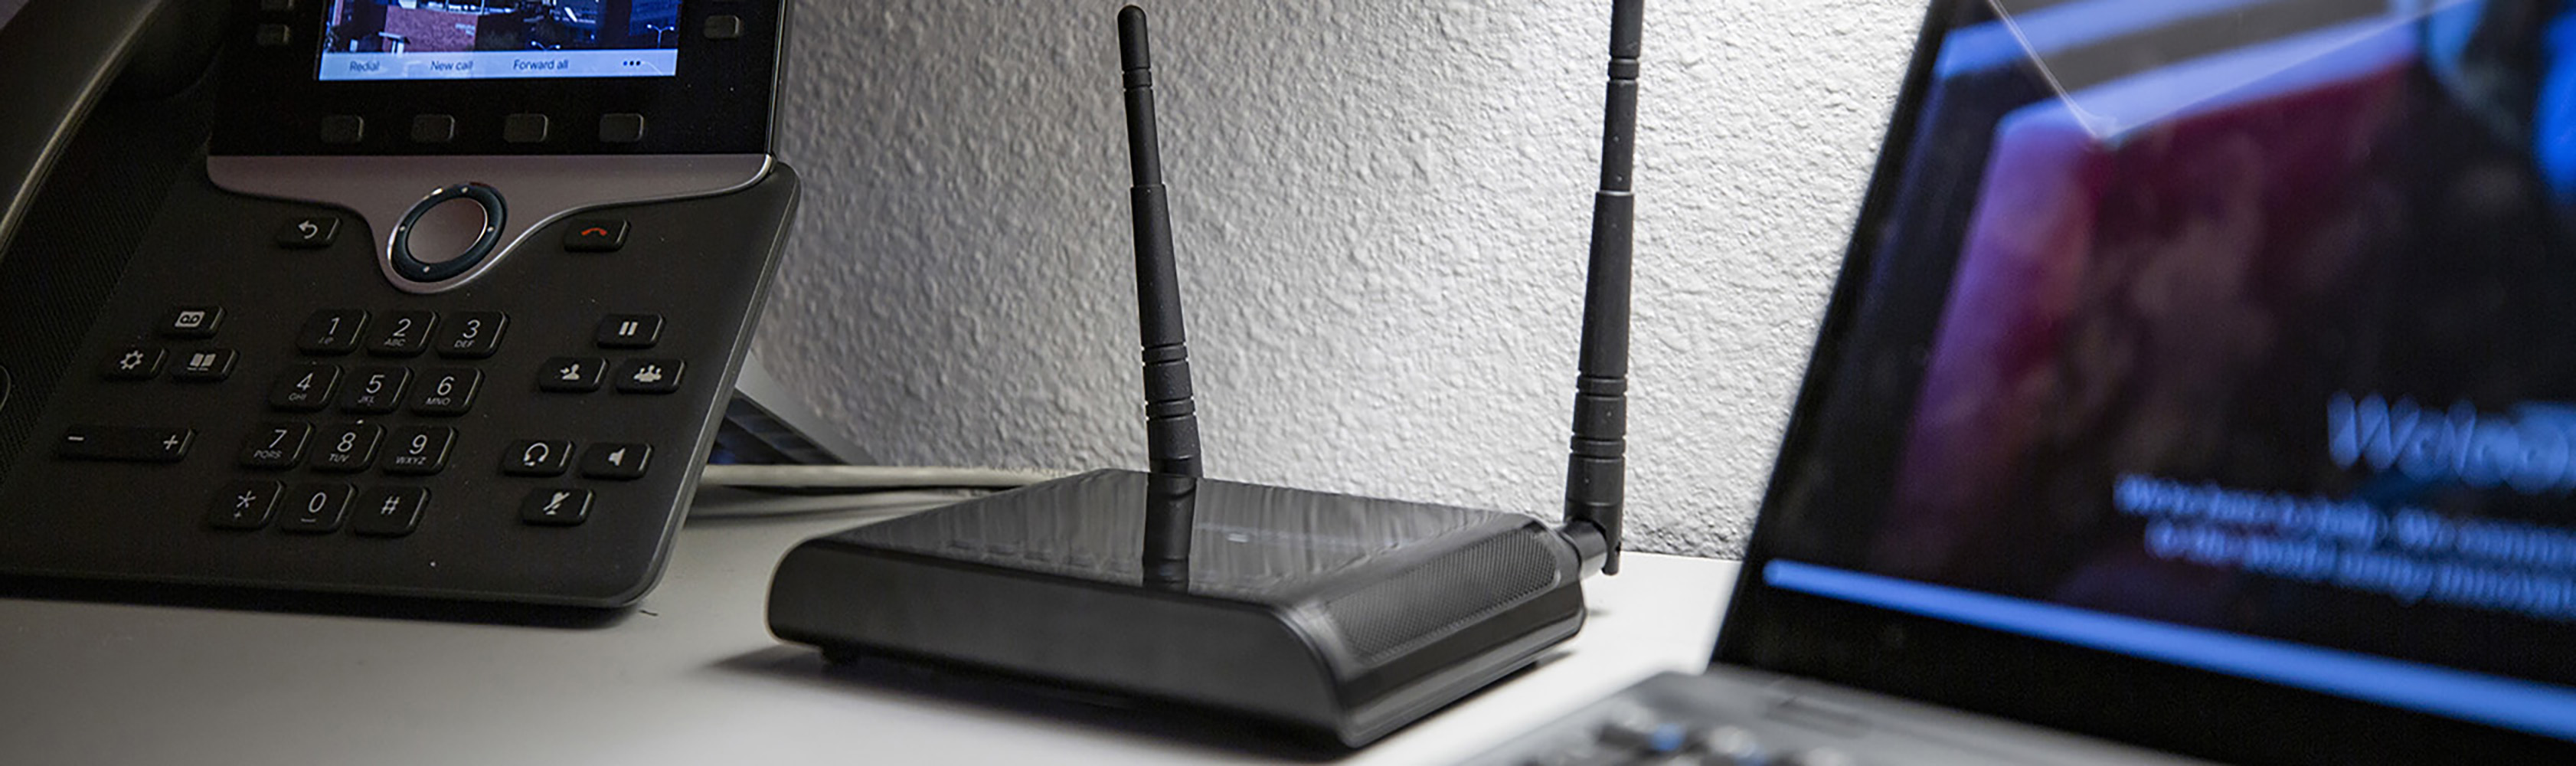 A wireless access point posed  between a VoIP phone and laptop computer.